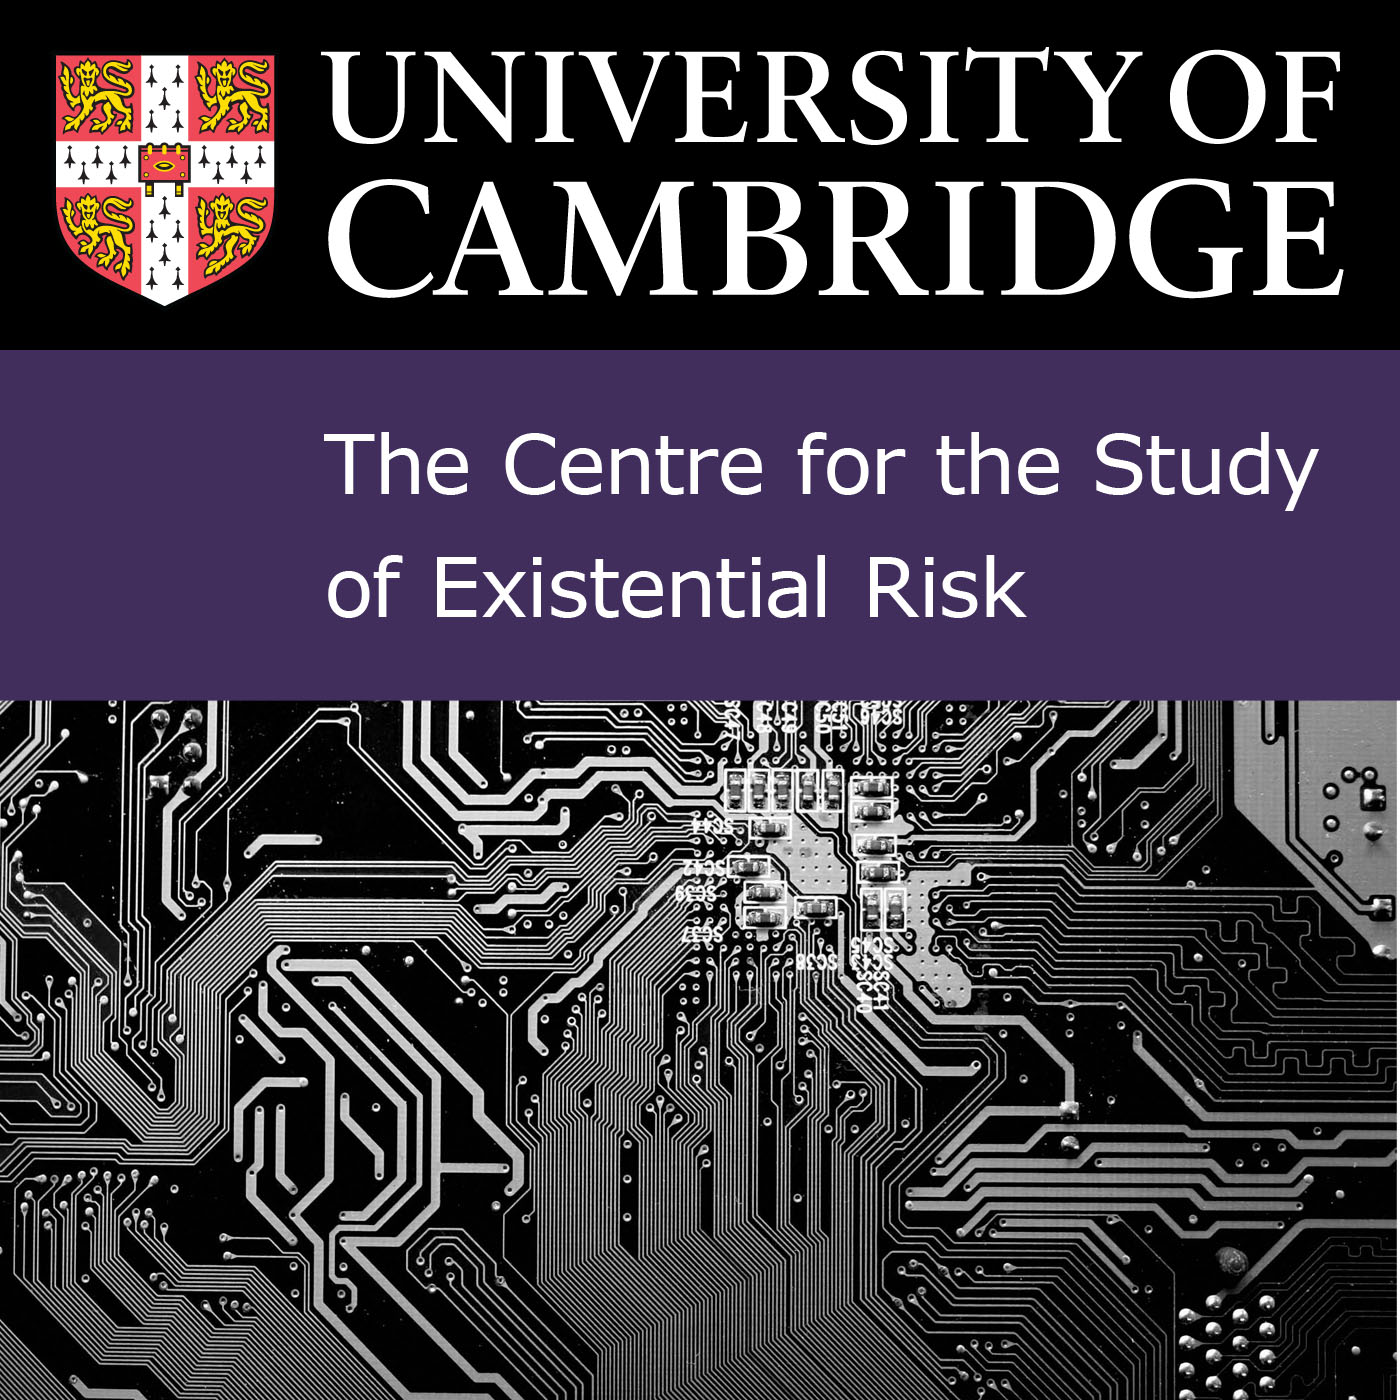 The Centre for the Study of Existential Risk's image